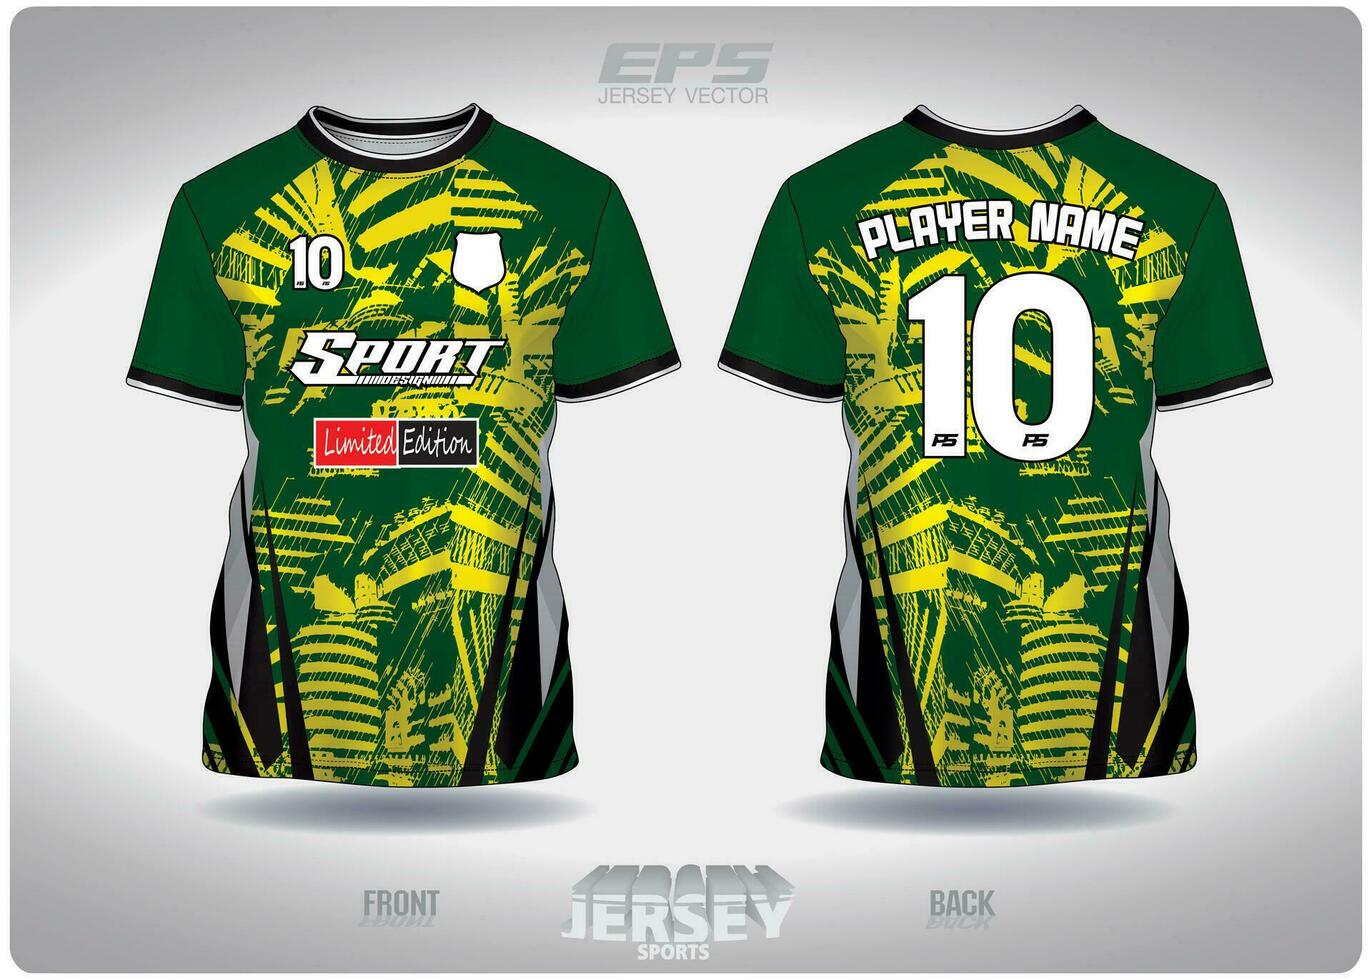 EPS jersey sports shirt vector.amazon green yellow pattern design, illustration, textile background for round neck sports t-shirt, football jersey shirt vector